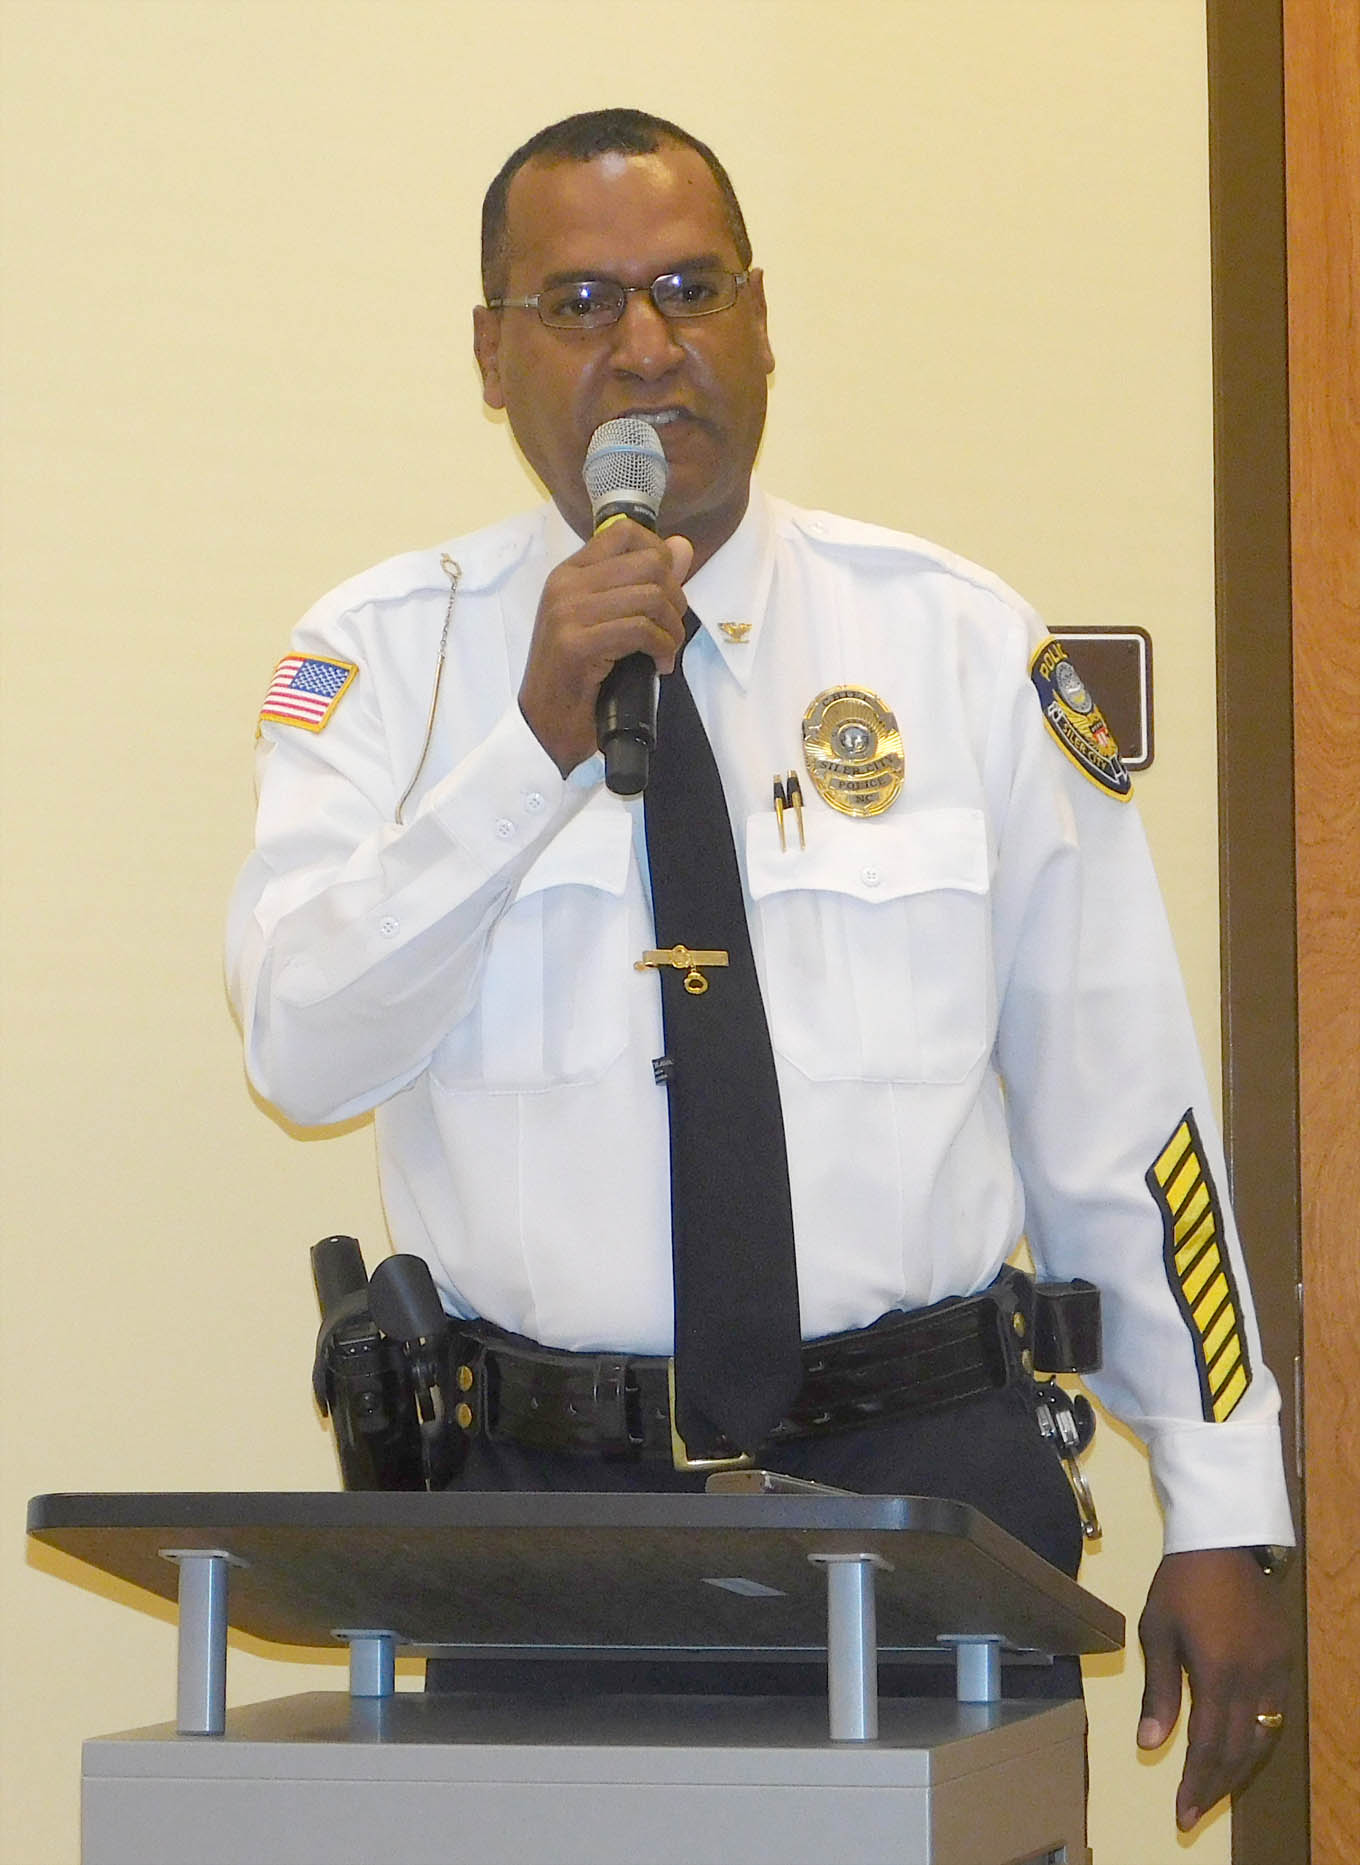 Click to enlarge,  Siler City Police Chief Gary T. Tyson, U.S. Marines veteran, was guest speaker at the Veterans Day program, "Celebrating American Heroes," on Nov. 4 at Central Carolina Community College's Siler City Center. 